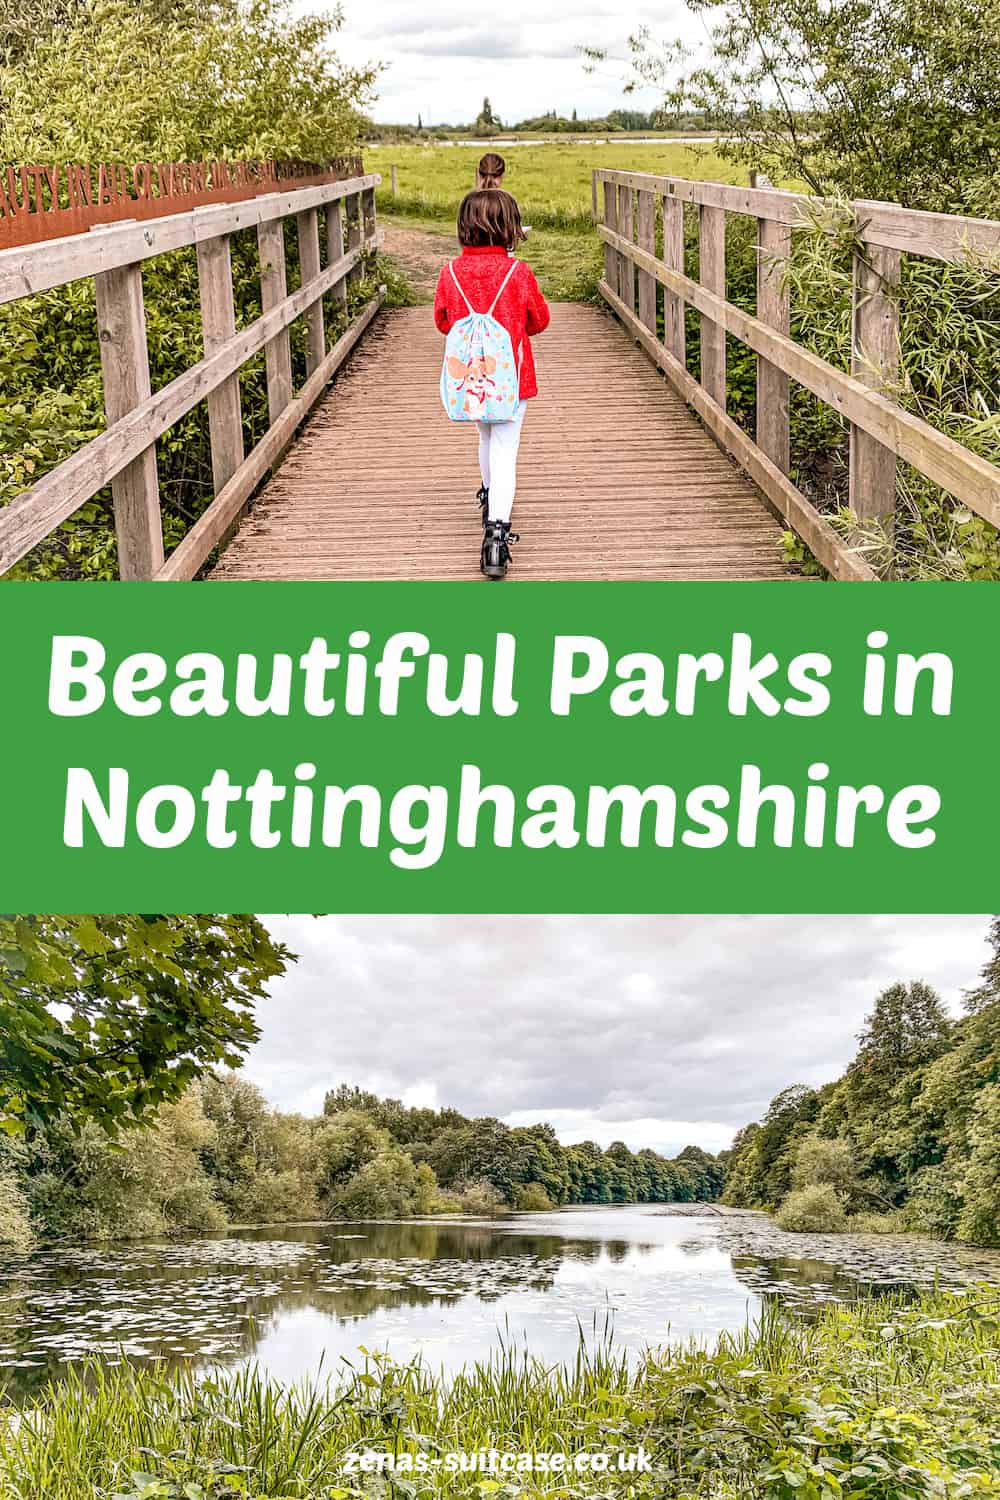 Beautiful parks in Nottinghamshire